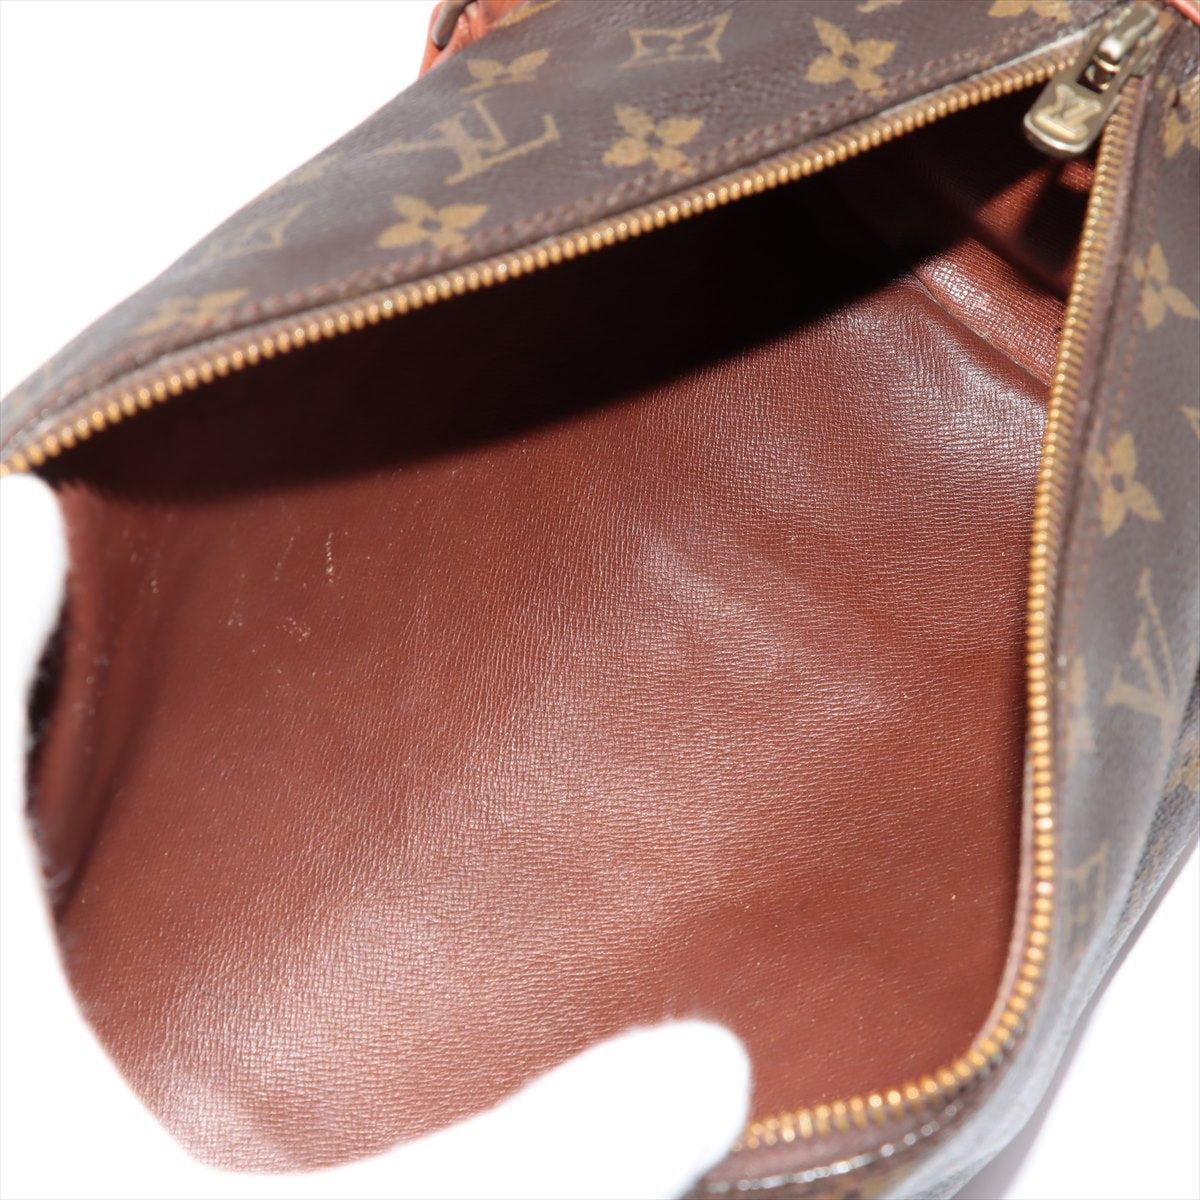 Brown and tan monogram coated canvas Louis Vuitton Papillon 30 cm with gold-tone For Sale 2